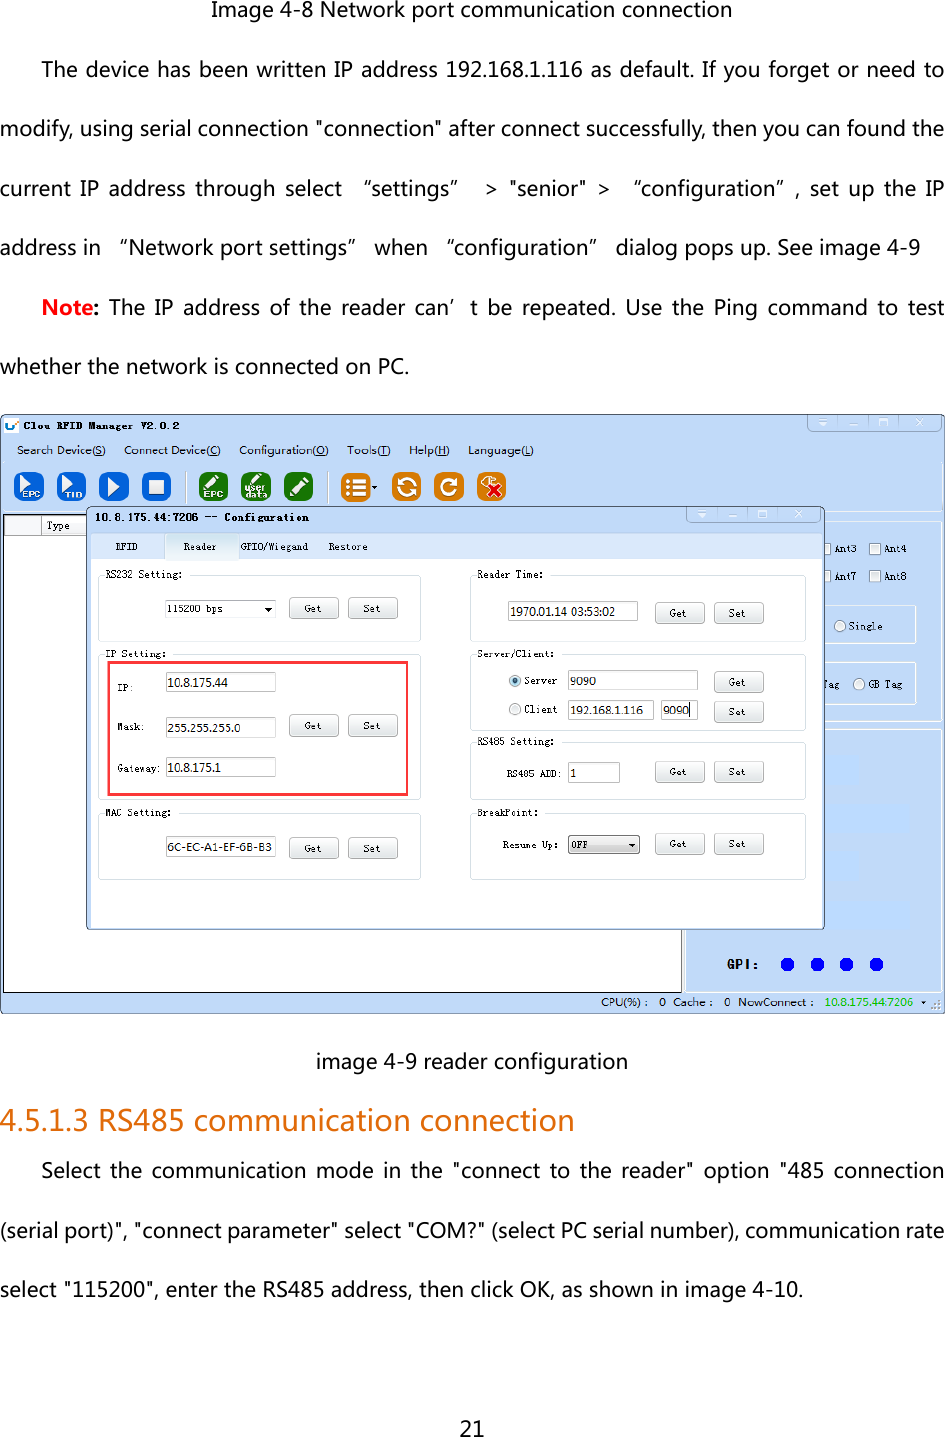  21  Image 4-8 Network port communication connection The device has been written IP address 192.168.1.116 as default. If you forget or need to modify, using serial connection &quot;connection&quot; after connect successfully, then you can found the current  IP  address  through  select  “settings” &gt;  &quot;senior&quot;  &gt;  “configuration”,  set  up  the  IP address in “Network port settings” when “configuration” dialog pops up. See image 4-9 Note:  The IP address of the reader can’t be repeated. Use the Ping command  to  test whether the network is connected on PC.  image 4-9 reader configuration 4.5.1.3 RS485 communication connection Select the communication mode in the &quot;connect to the reader&quot; option  &quot;485 connection (serial port)&quot;, &quot;connect parameter&quot; select &quot;COM?&quot; (select PC serial number), communication rate select &quot;115200&quot;, enter the RS485 address, then click OK, as shown in image 4-10. 